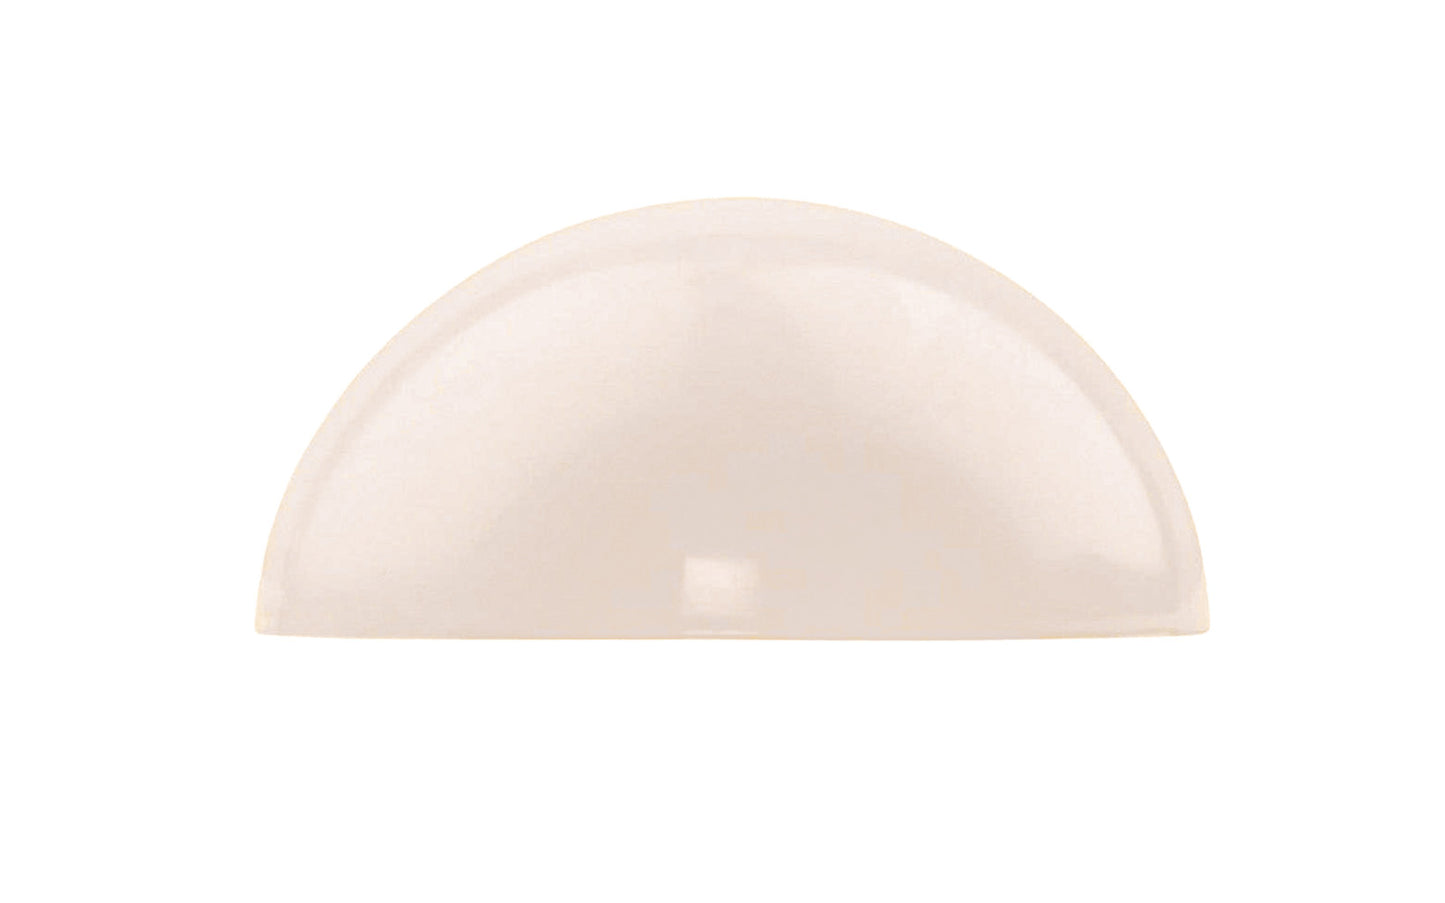 Air cushioned Softstop Almond / Beige Wall Door Bumpers. Protects walls & covers minor damage or marks on wall. Permanent self-adhesive backing. Soft plastic. 2-3/8" diameter. 1" projection. 2 per pack. National Hardware Model No. N213-579. Air-cushioned bumper action absorbs shock. Self adhesive back. 038613213579